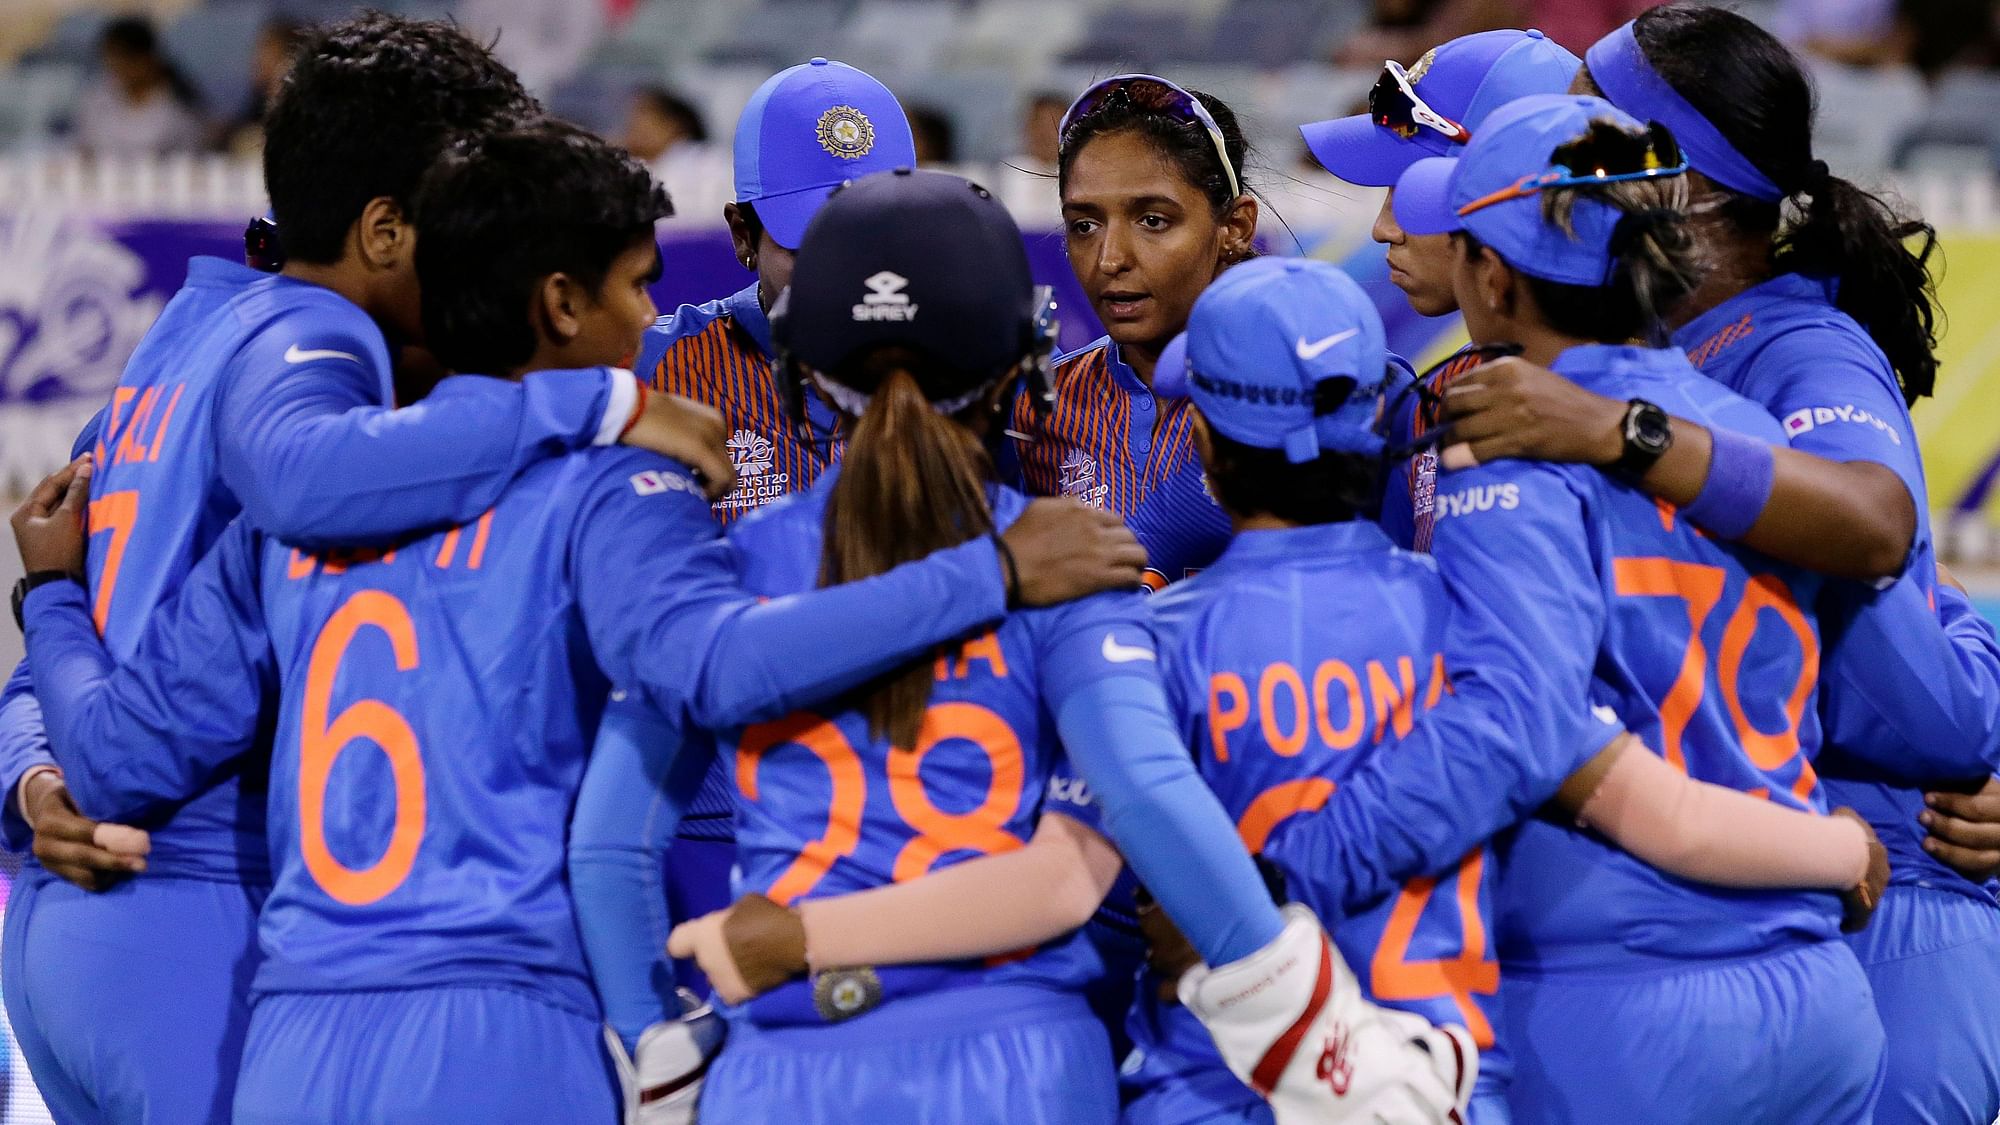 icc-women-s-t20-world-cup-shafali-poonam-guide-india-to-18-run-win-vs